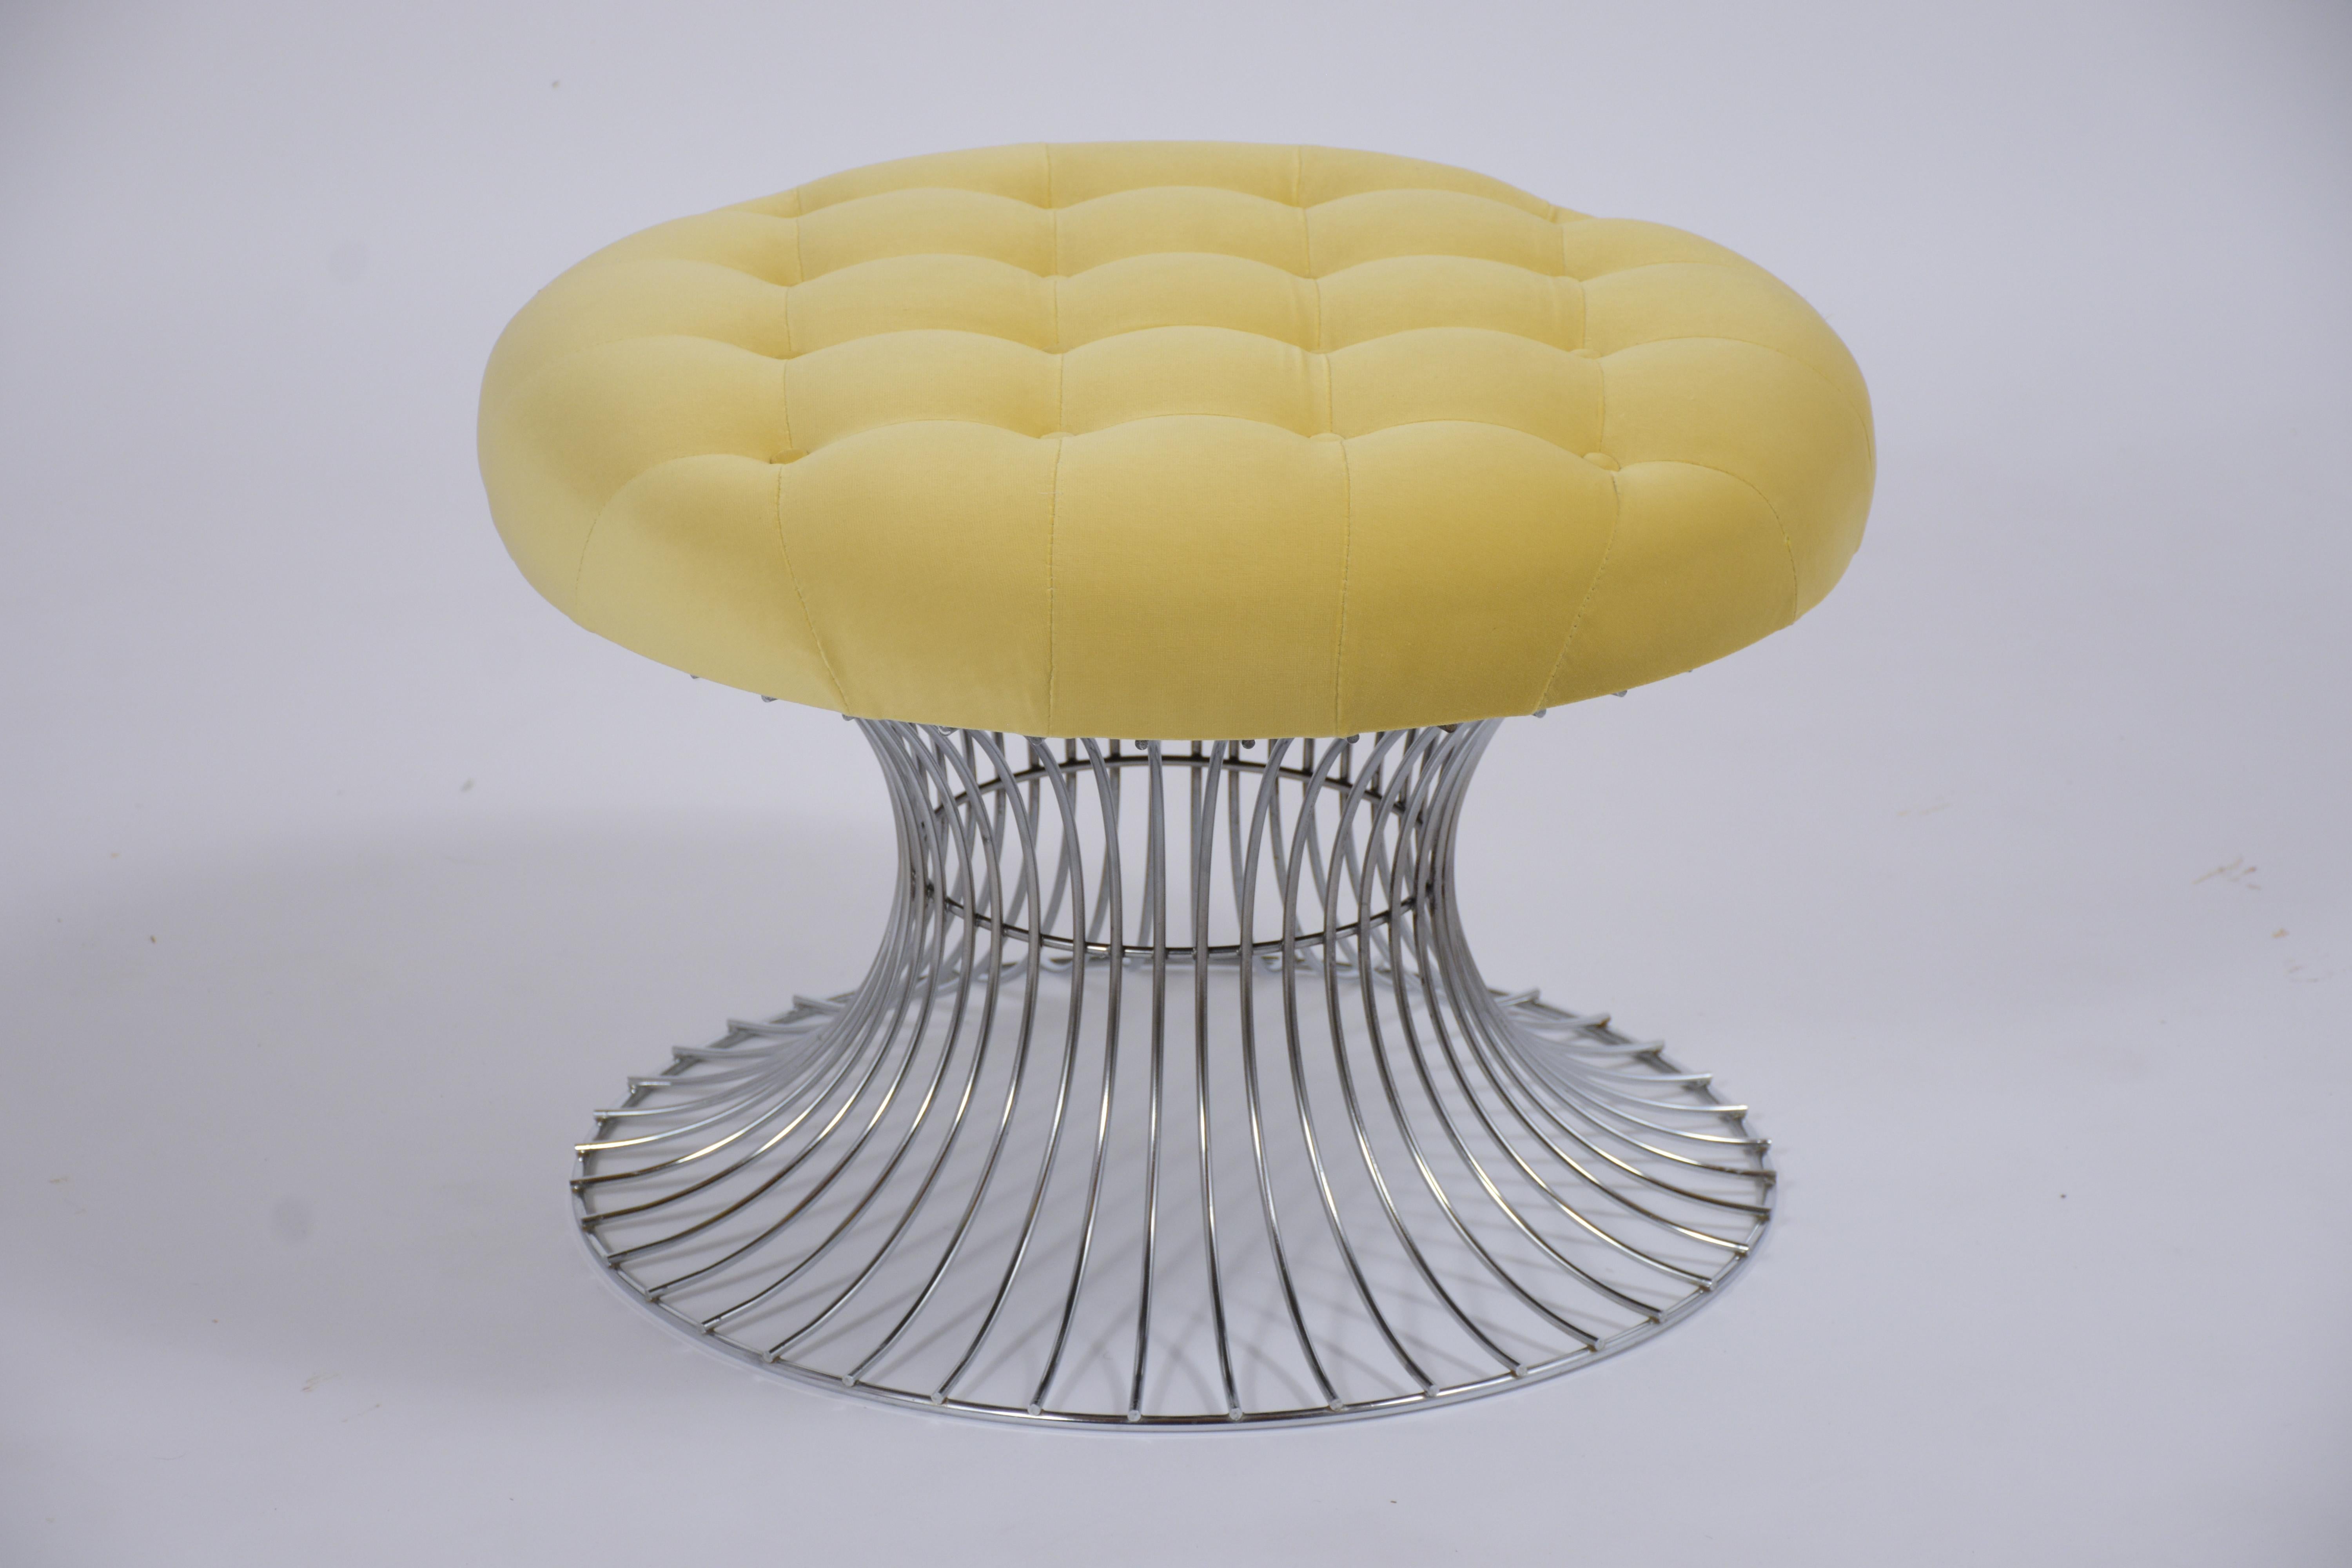 This vintage tufted stool is in great condition, has a solid steel frame, and has been newly upholstered in a yellow velvet fabric. The fabulous stool features a new tufted round comfortable seat cushion with top-stitch and single piping details.